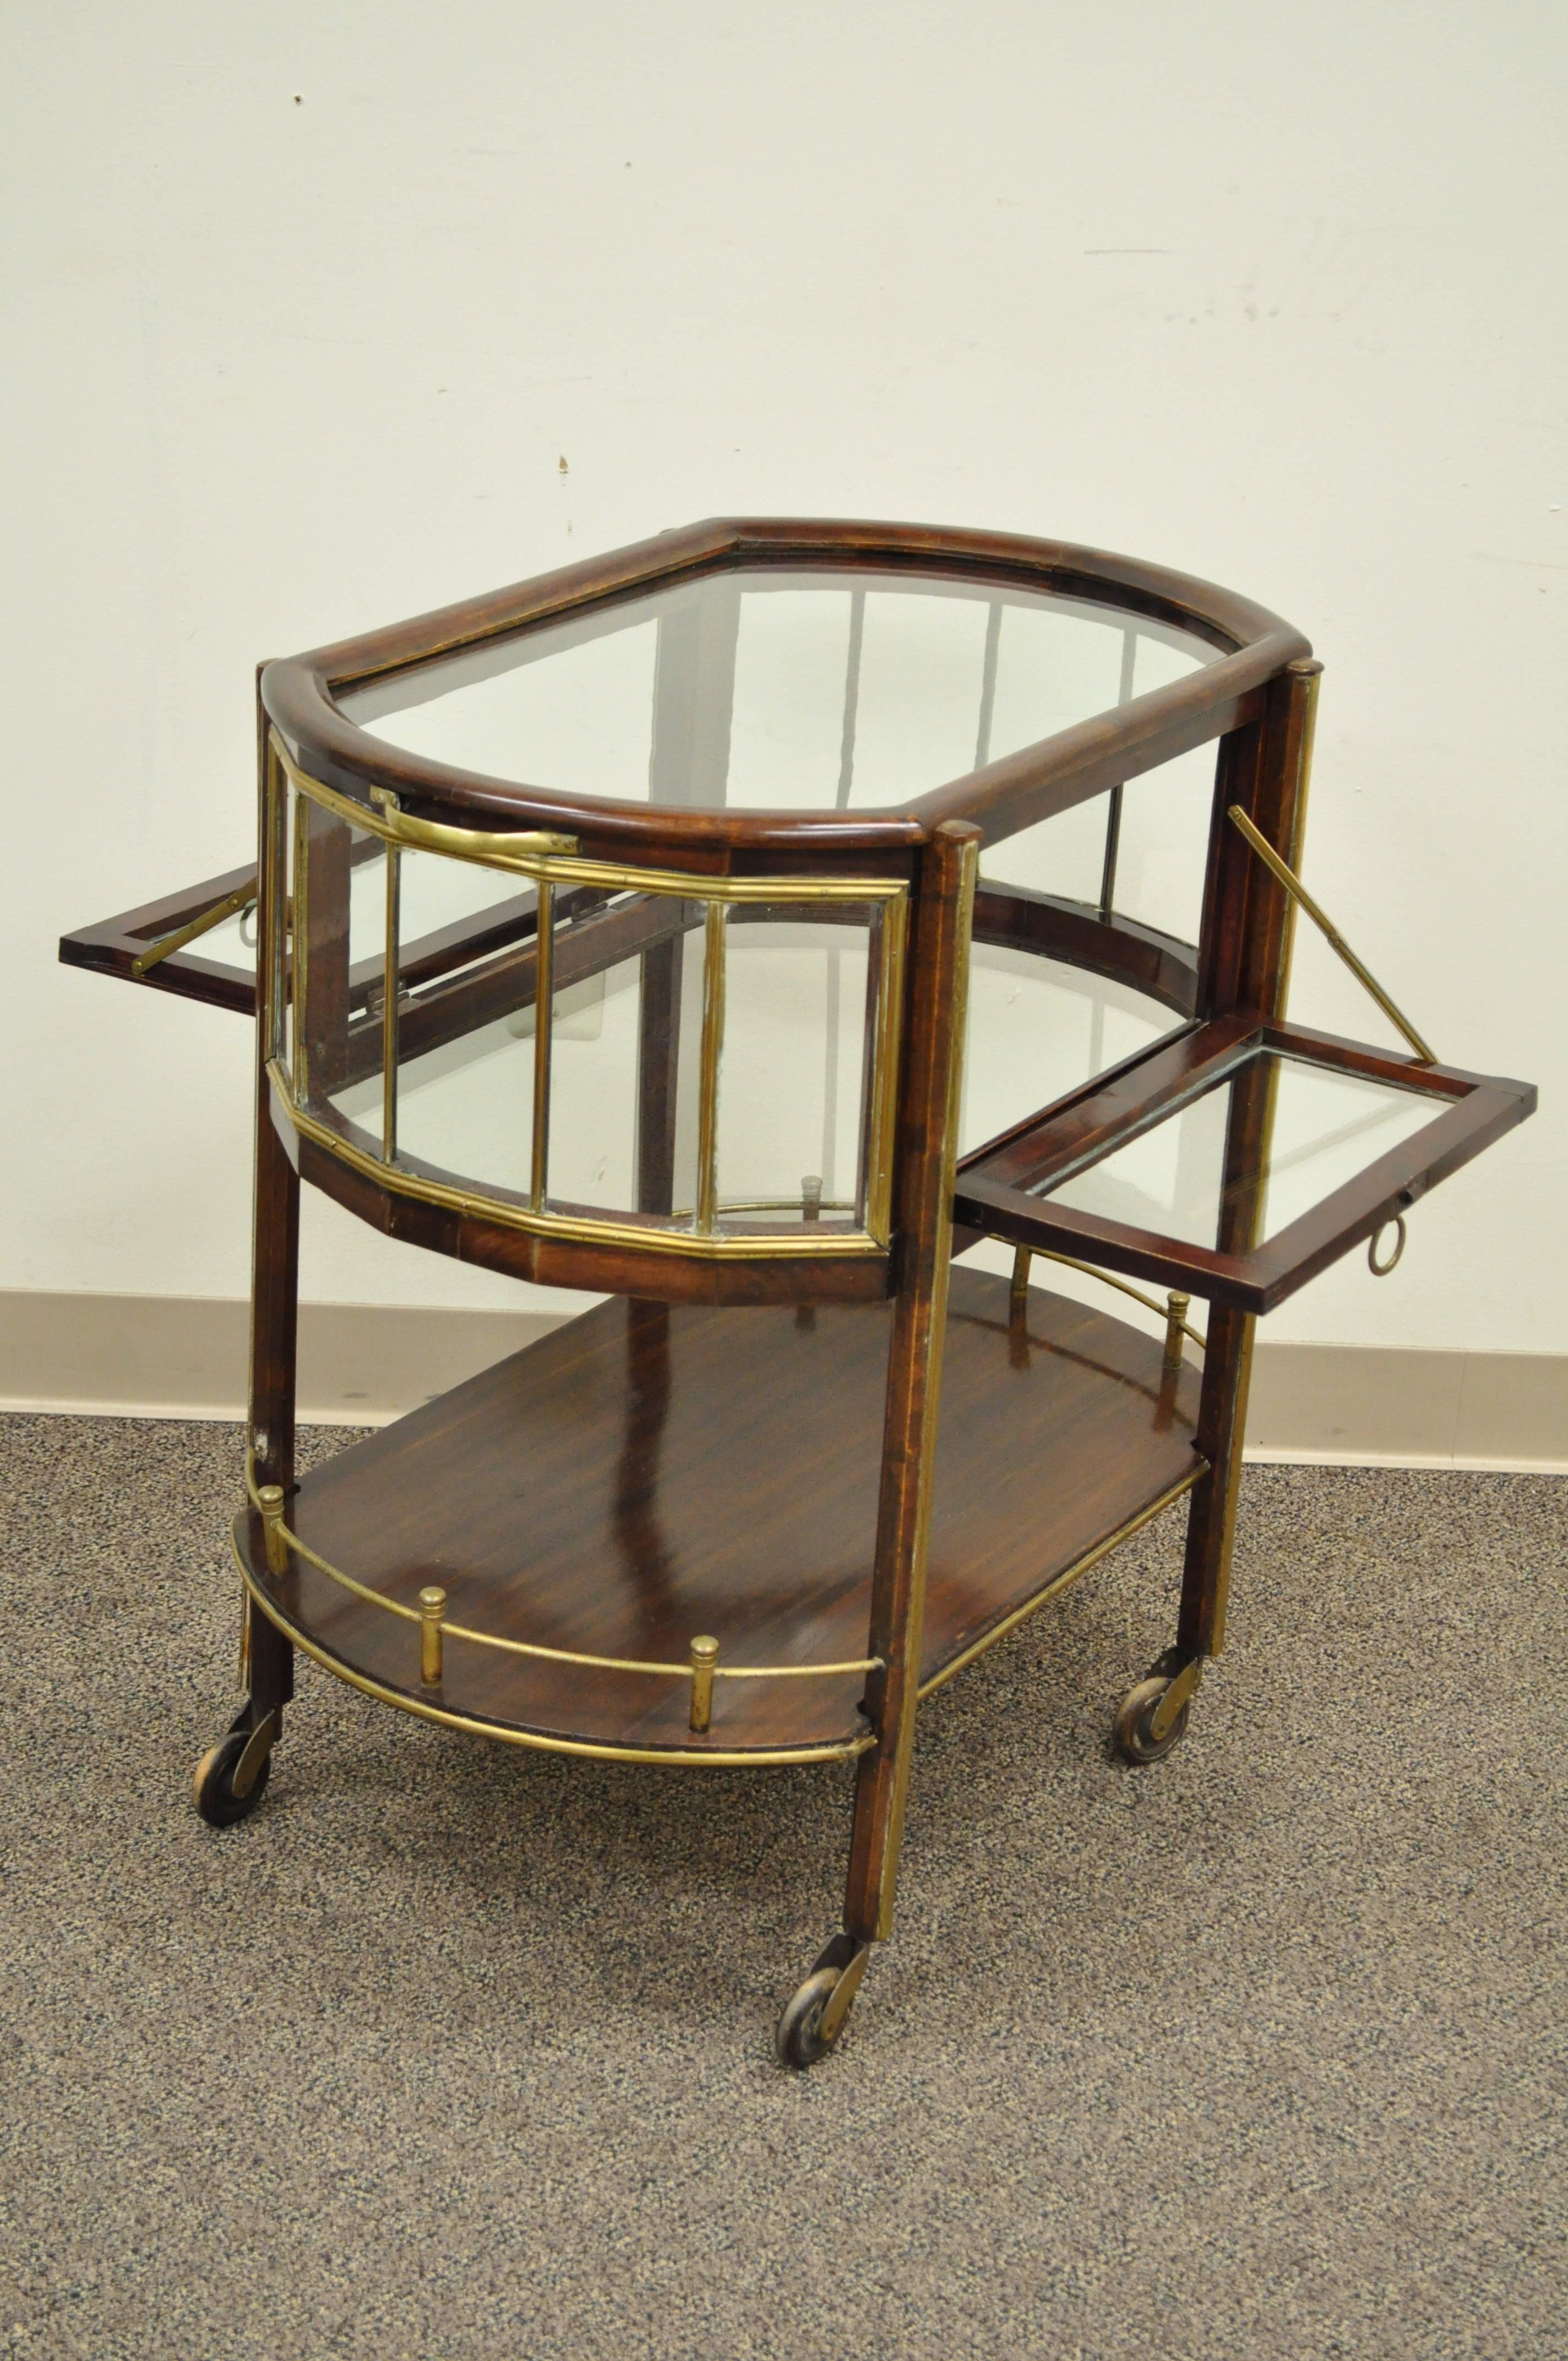 Very unique 19th century English mahogany and brass drop side rolling drinks trolley. Item features individual panes of glass on the top and all sides, two drop side doors. Clear glass interior surface, brass trim and gallery and unique wooden